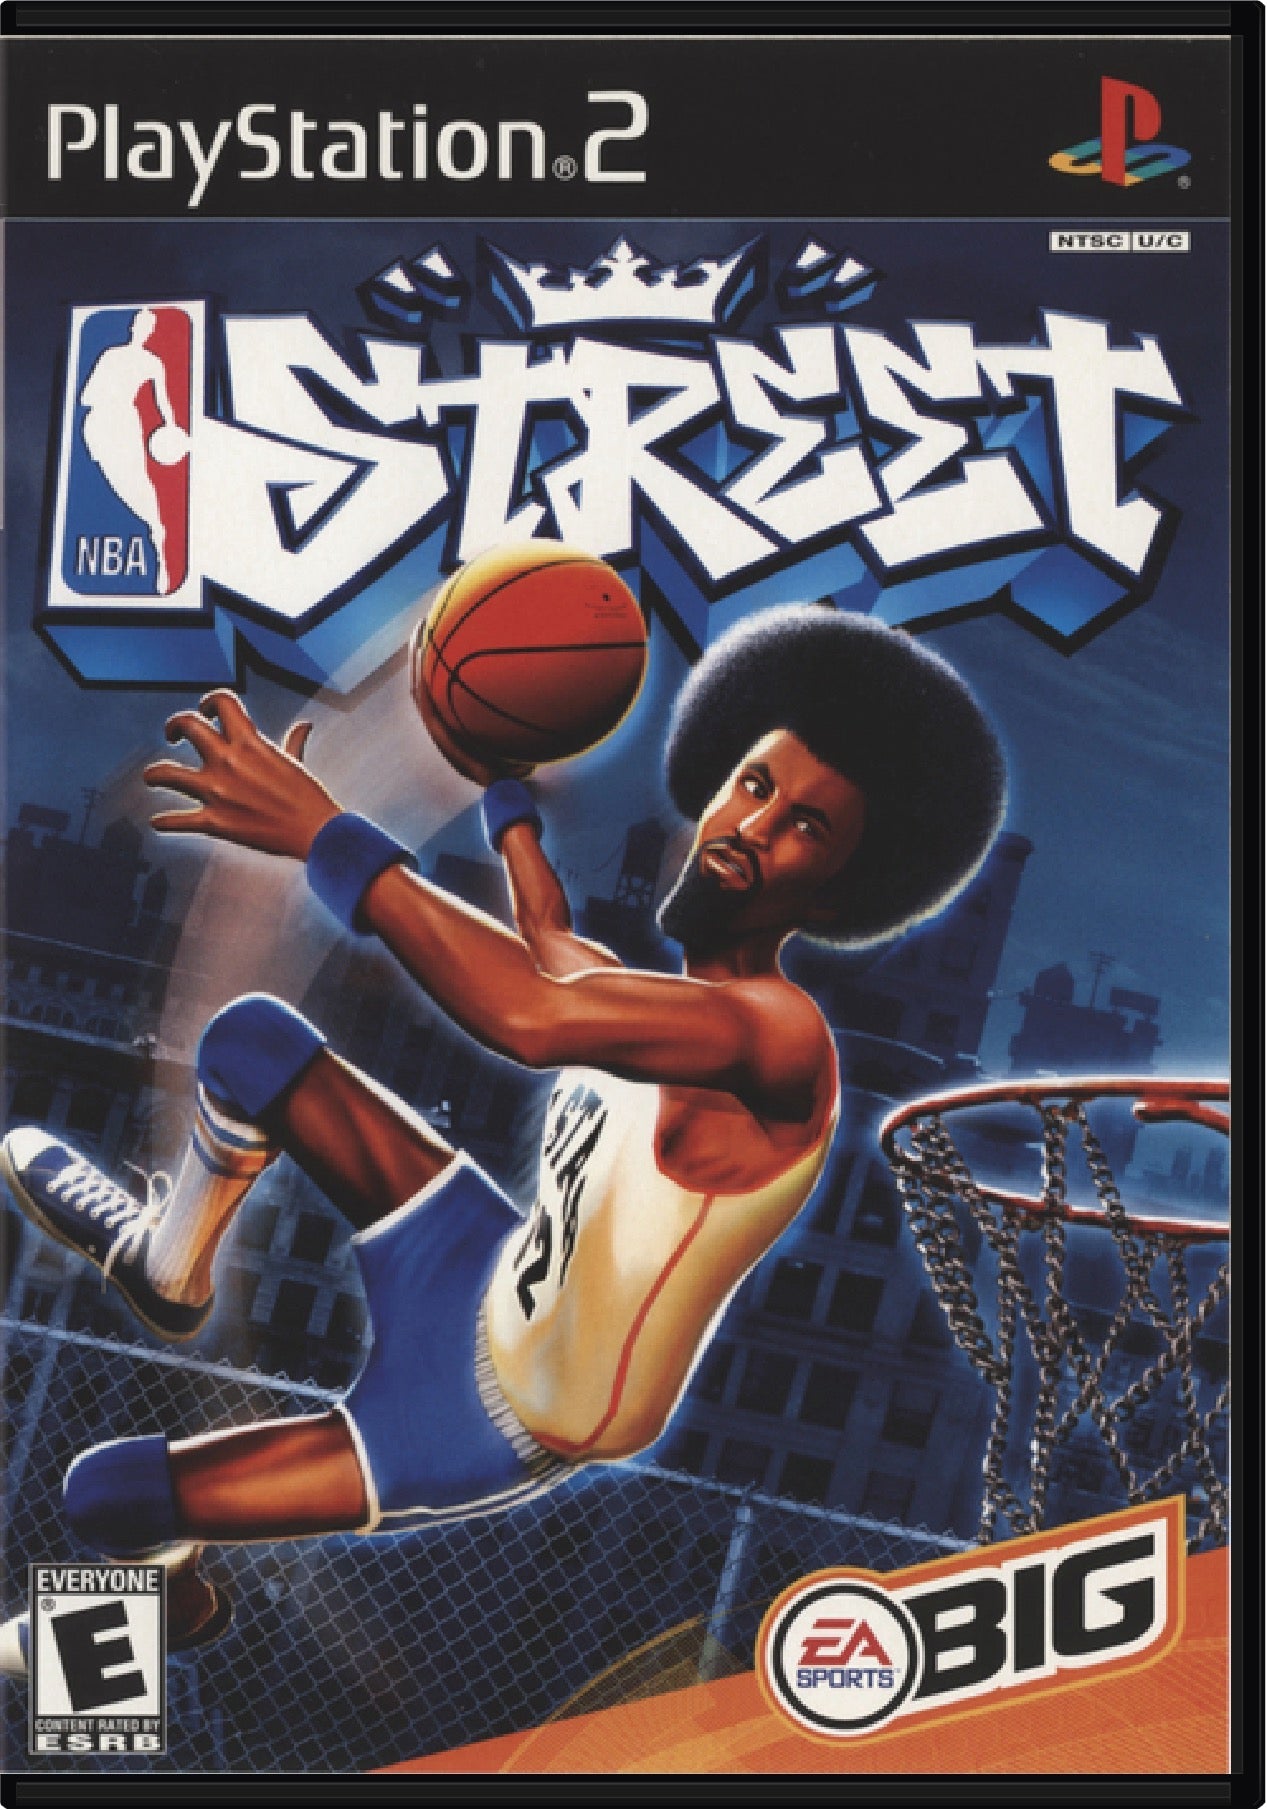 NBA Street Cover Art and Product Photo